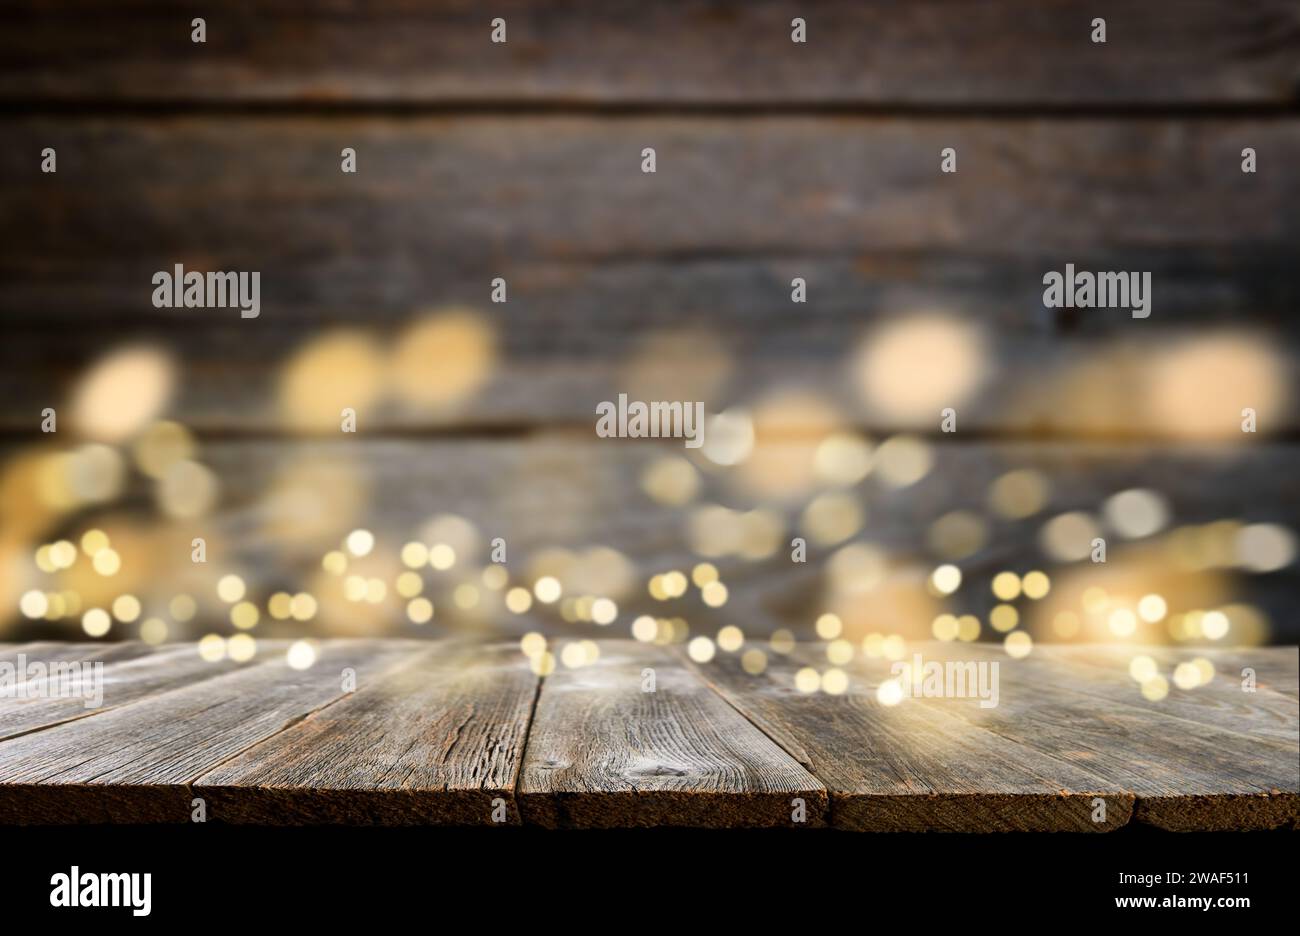 Empty rustic wooden table with blurred glitter lights background. Christmas lights on empty wooden table. Xmas holidays wallpaper. Stock Photo